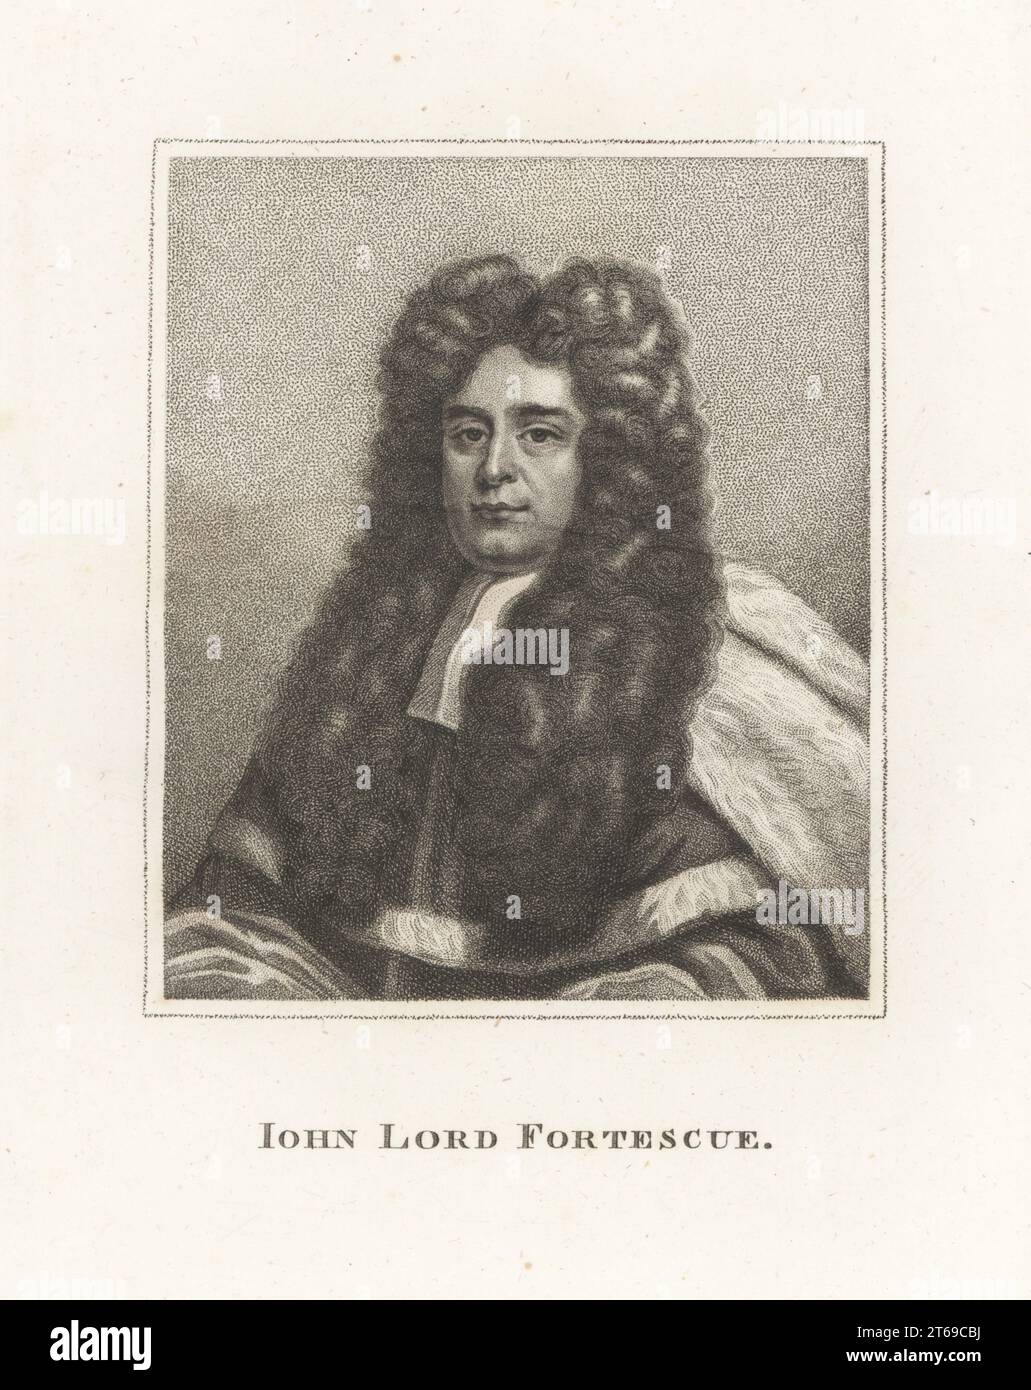 John Fortescue Aland, 1st Baron Fortescue of Credan, 1670-1746, English lawyer, judge and politician. In powdered wig and robes. John Lord Fortescue. From a drawing by R. Gardiner after Sir Godfrey Kneller. Copperplate engraving from Samuel Woodburns Gallery of Rare Portraits Consisting of Original Plates, George Jones, 102 St Martins Lane, London, 1816. Stock Photo